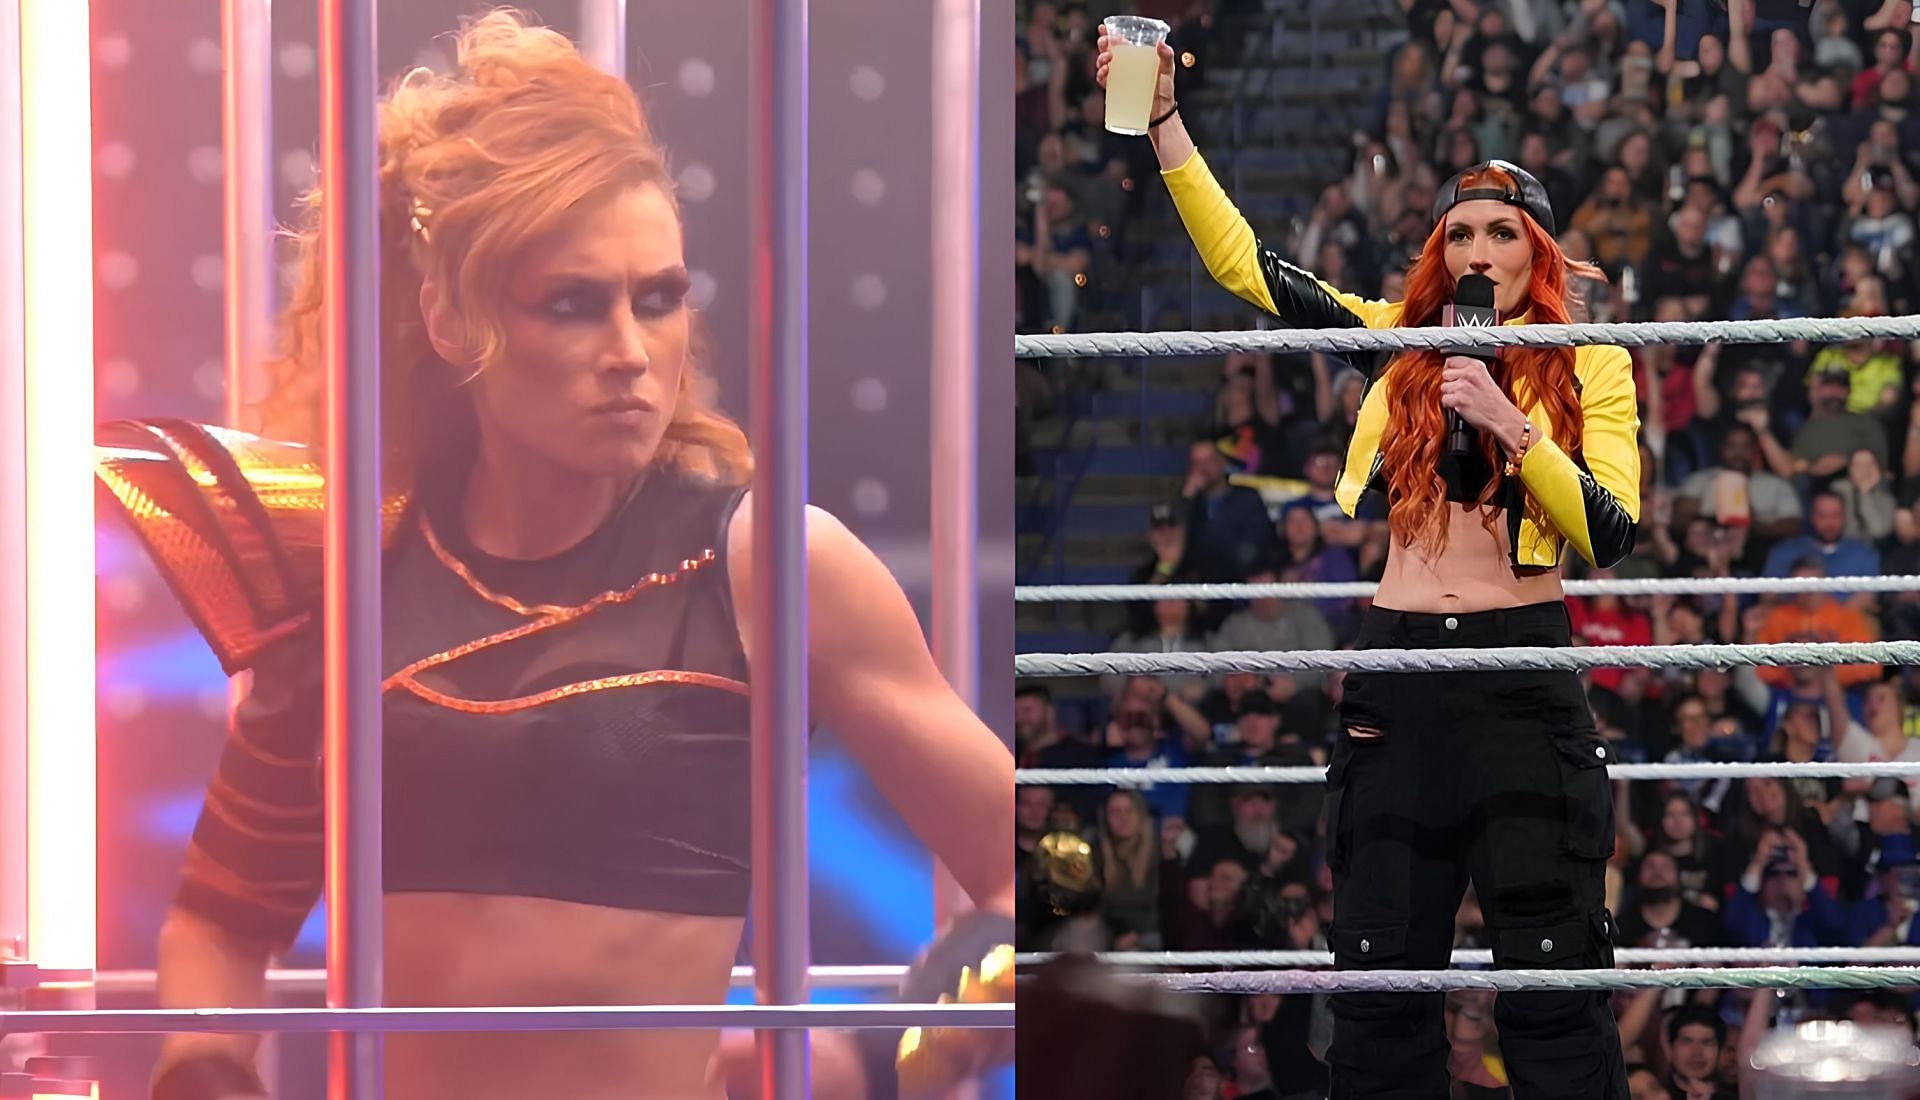 Becky Lynch is currently signed on RAW and is a multi-time Women